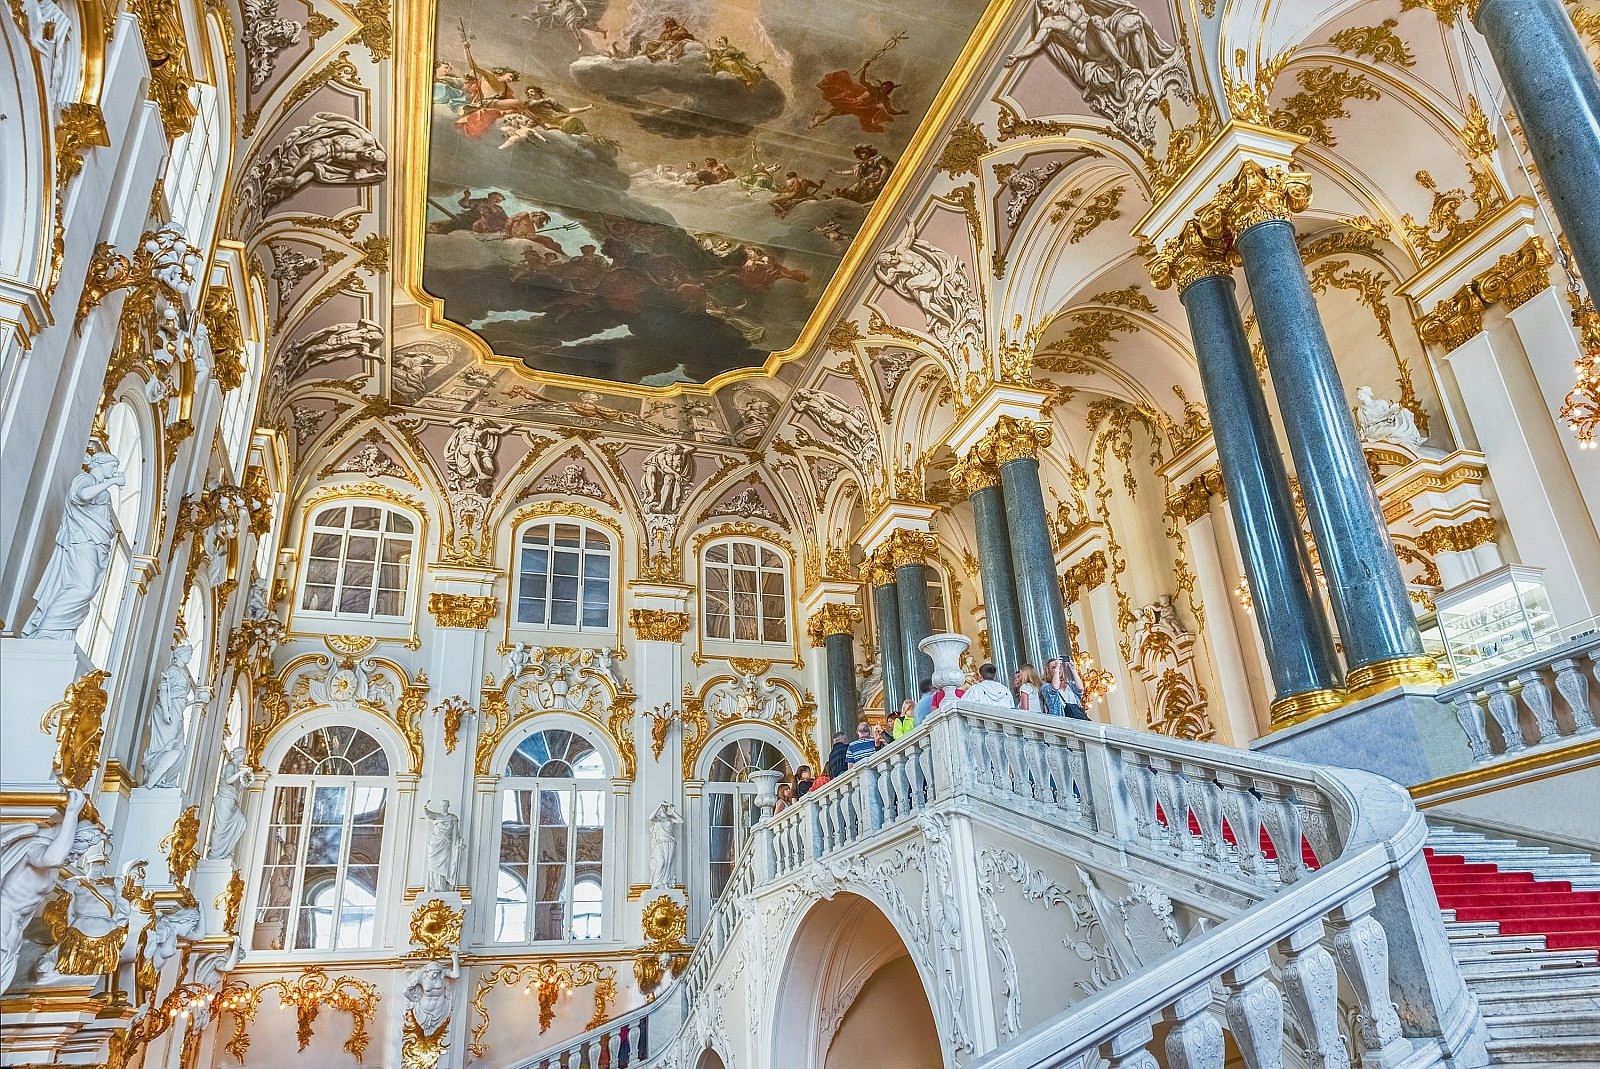 The ornate gilded Jordan Staircase of the Winter Palace at the Hermitage Museum in St Petersburg, Russia; above is a frescoed ceiling.